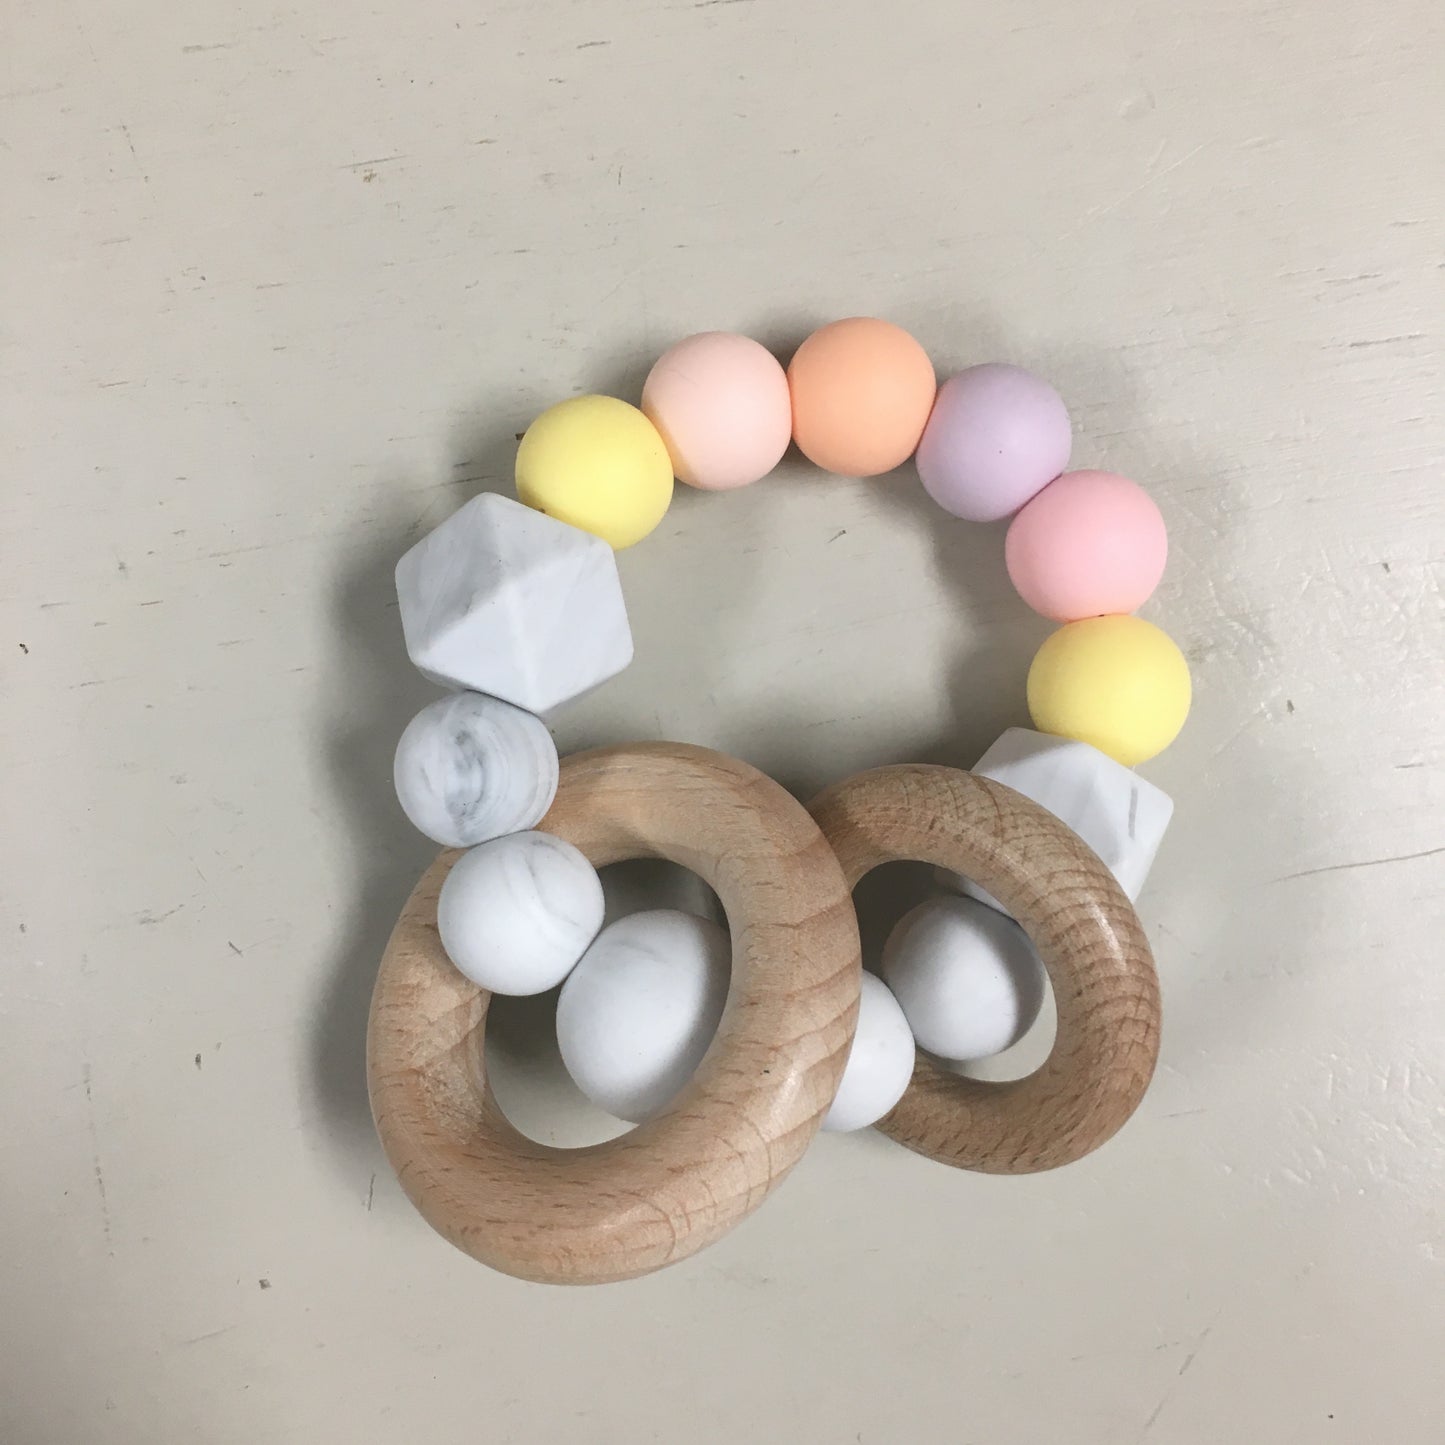 ring of silicone beads in shades of yellow, pink, and orange with two wooden rings on it.